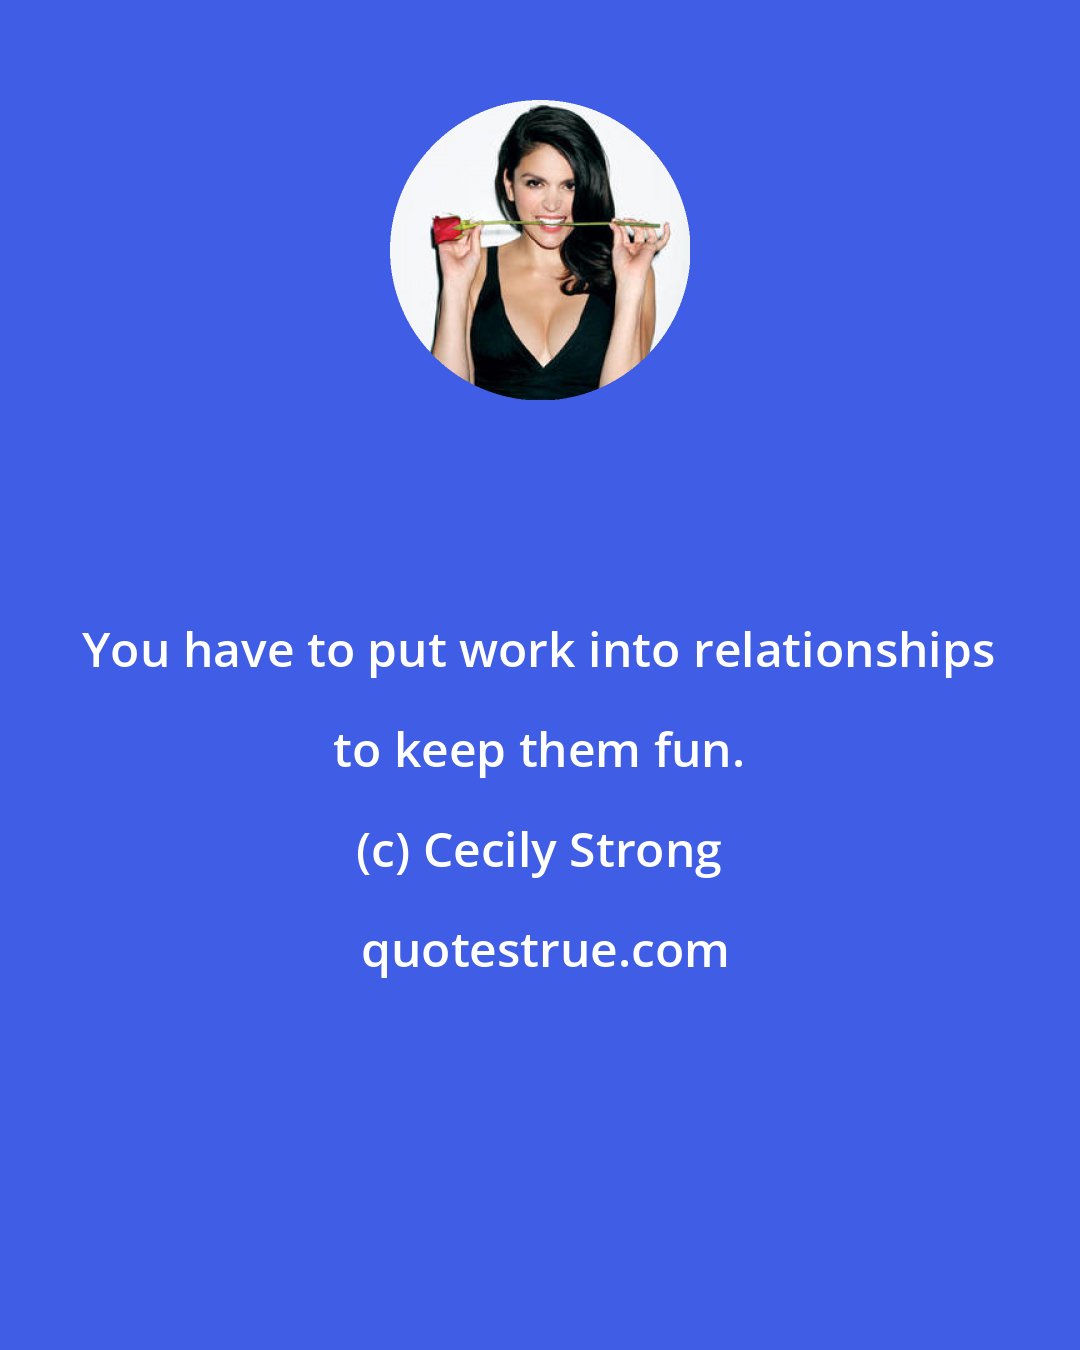 Cecily Strong: You have to put work into relationships to keep them fun.